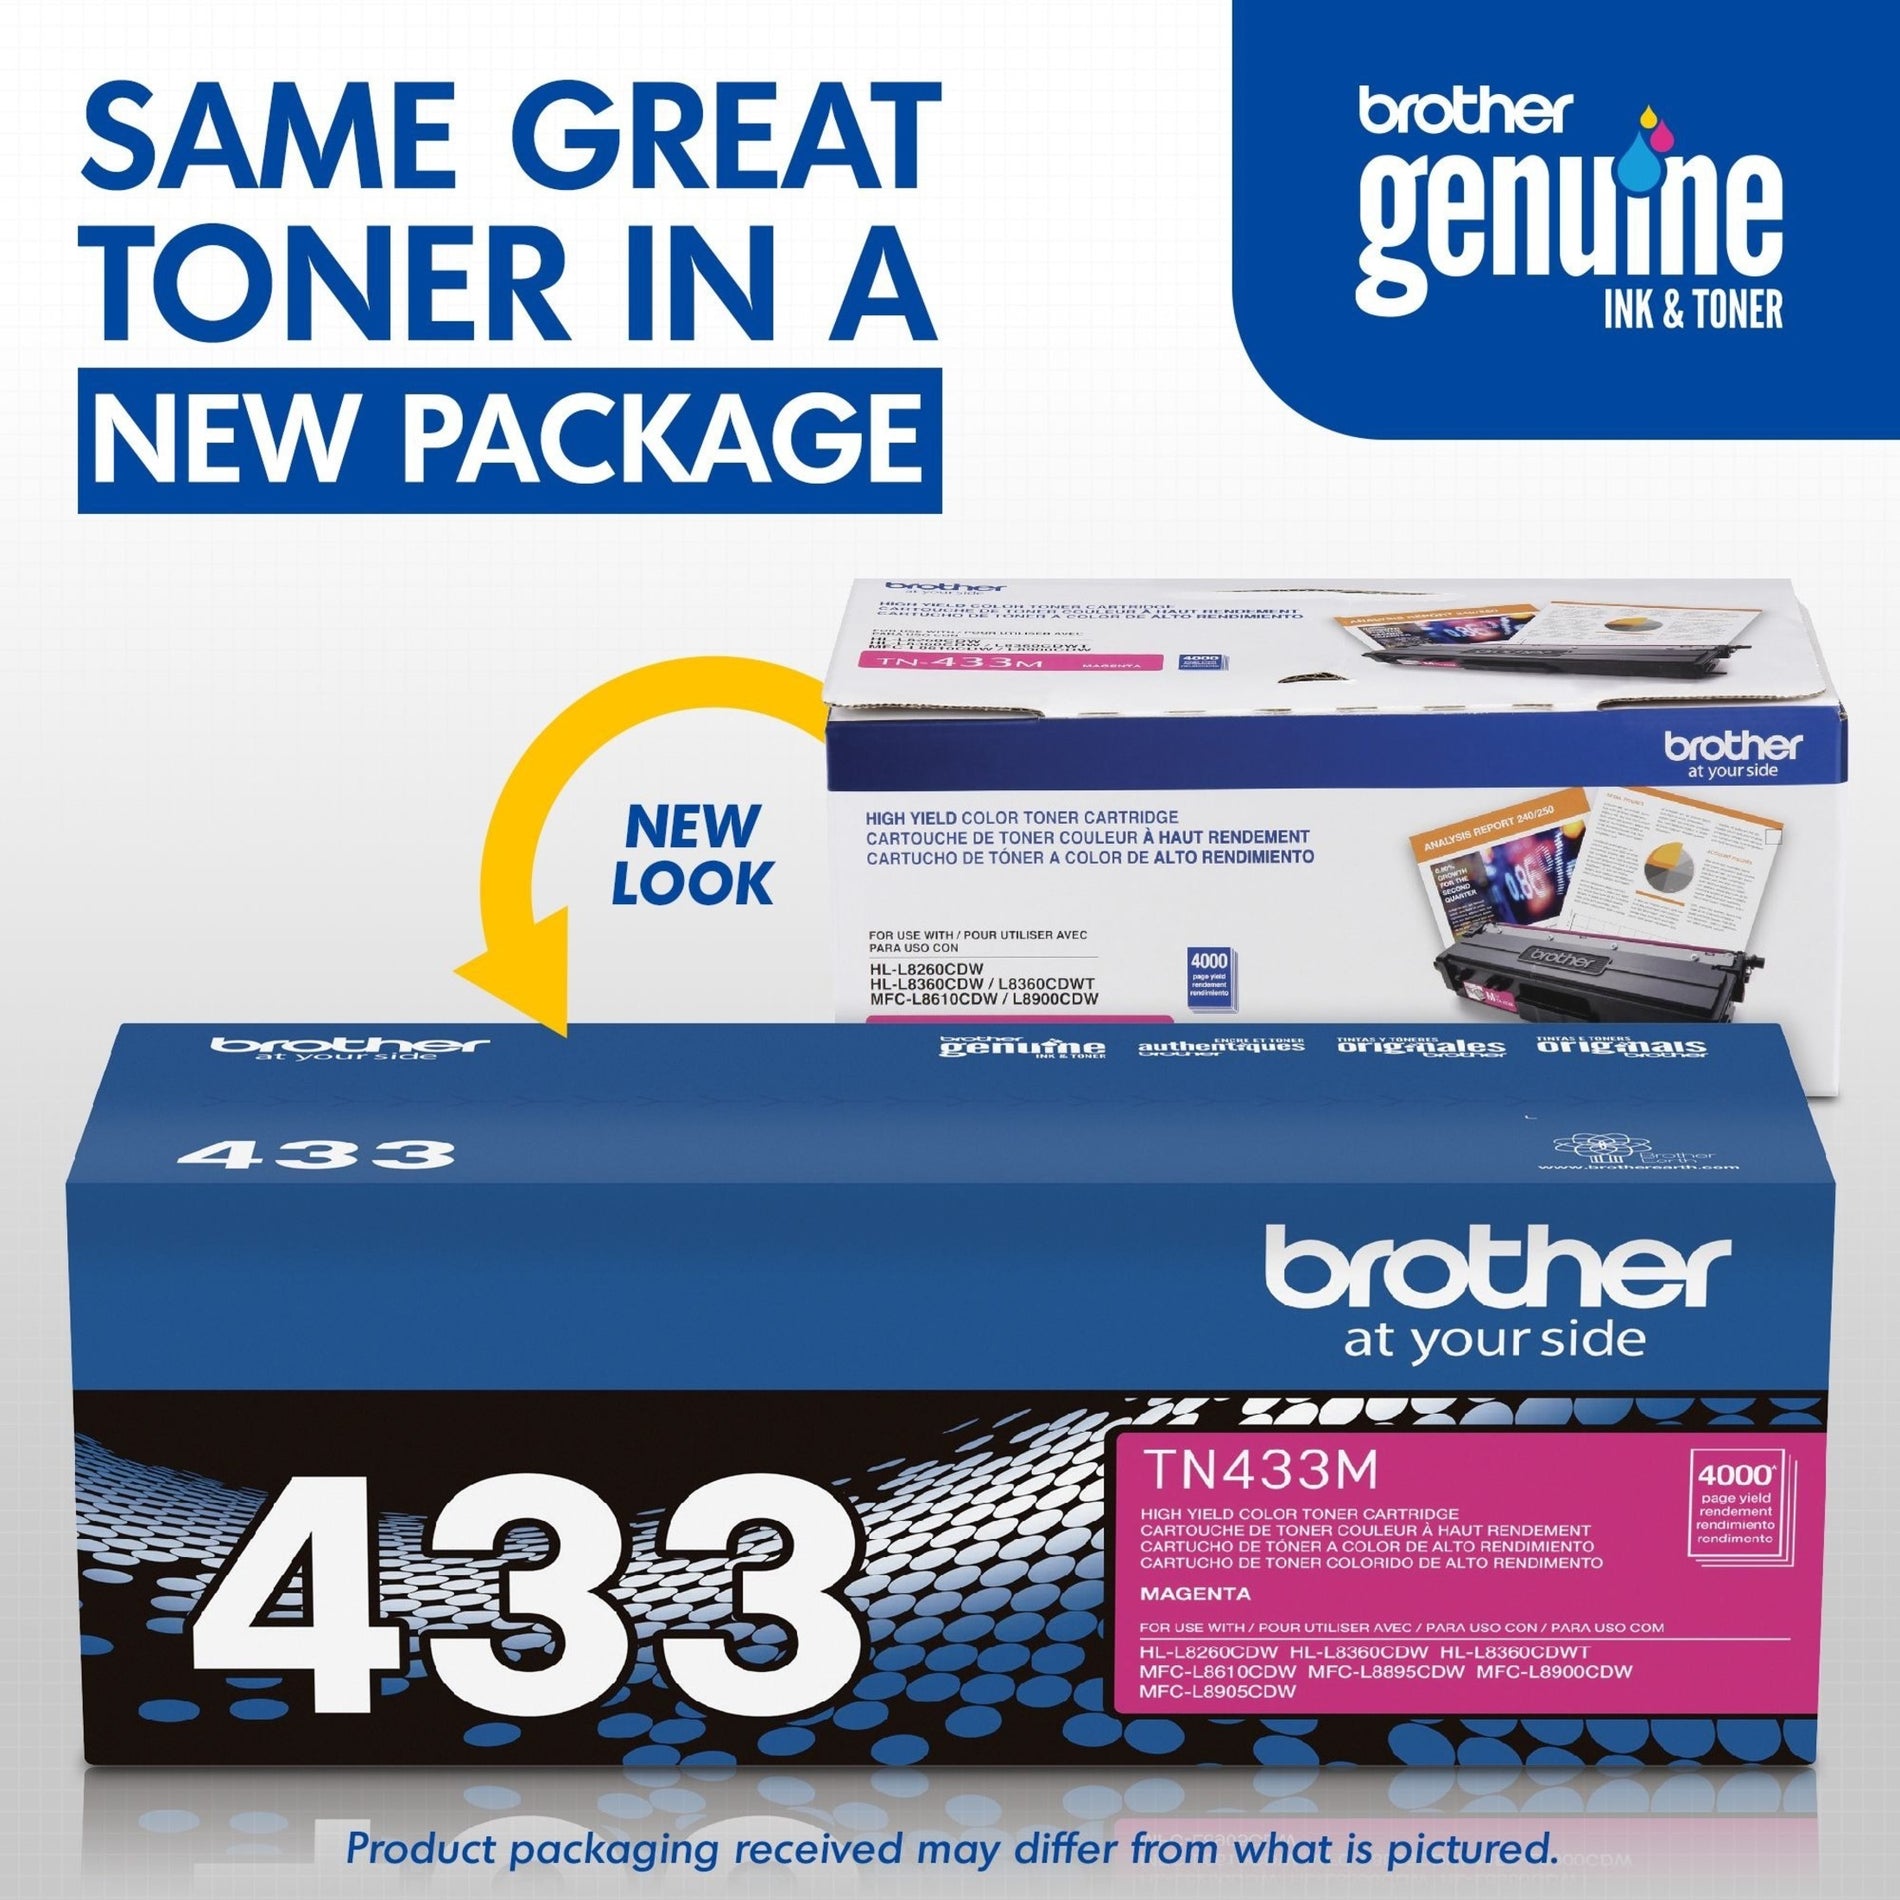 Brother TN433M Toner Cartridge, 4000 Page High Yield, Magenta